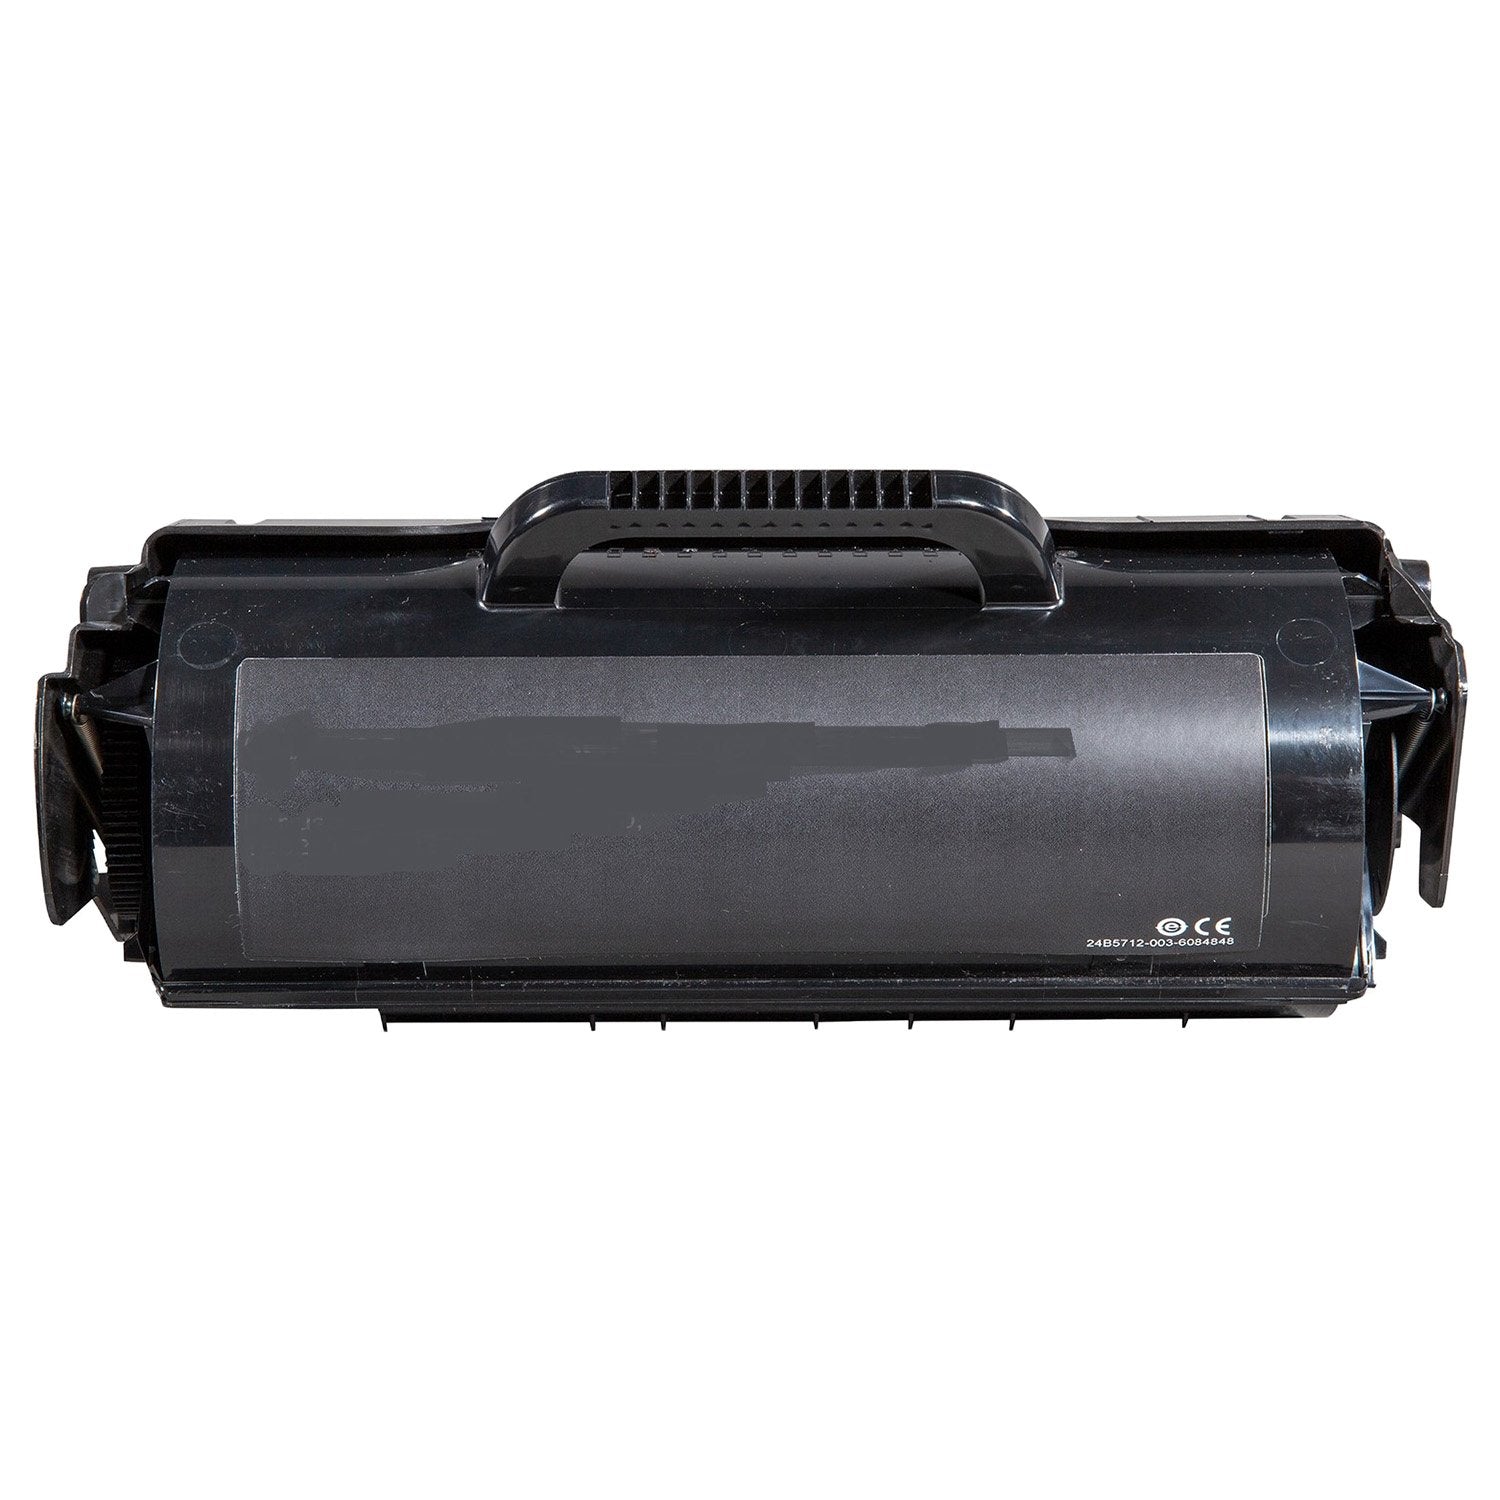 Absolute Toner Compatible Lexmark X651H11A Black Toner Cartridge | Absolute Toner Lexmark Toner Cartridges